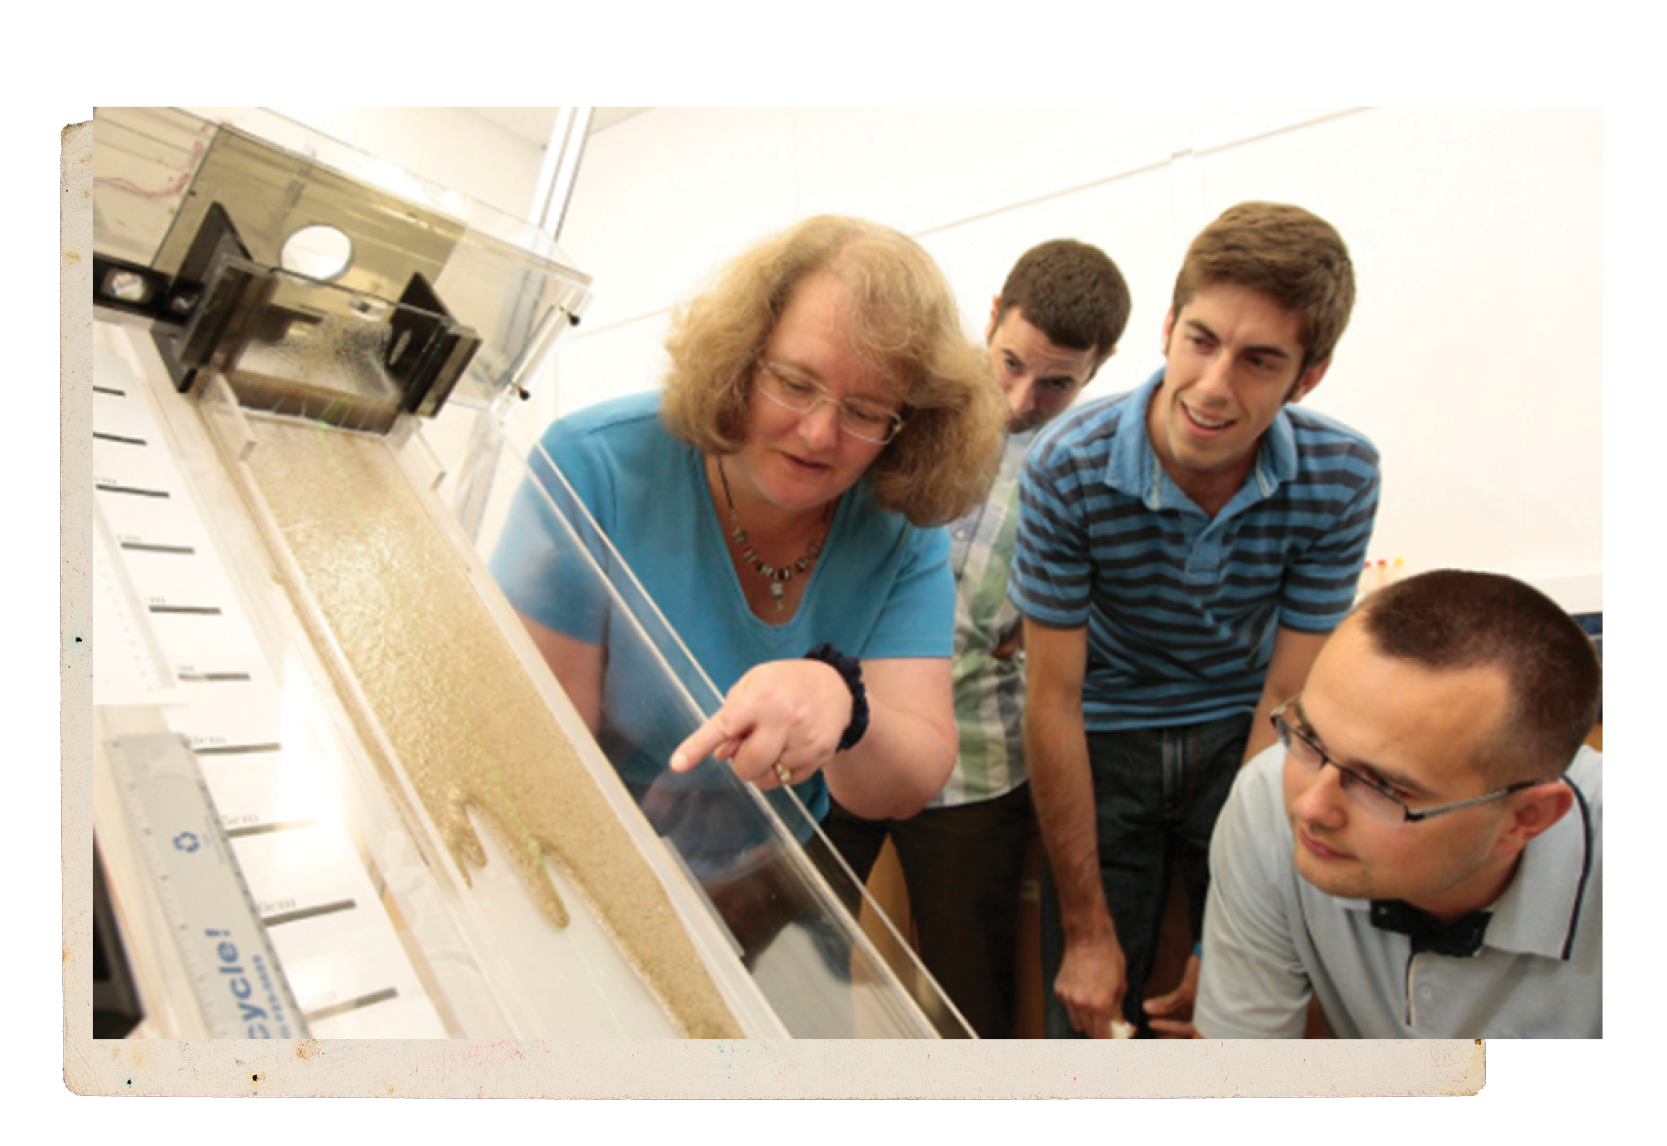 A professor and her students in a lab setting conducting an experiment involving oil and beach sand.